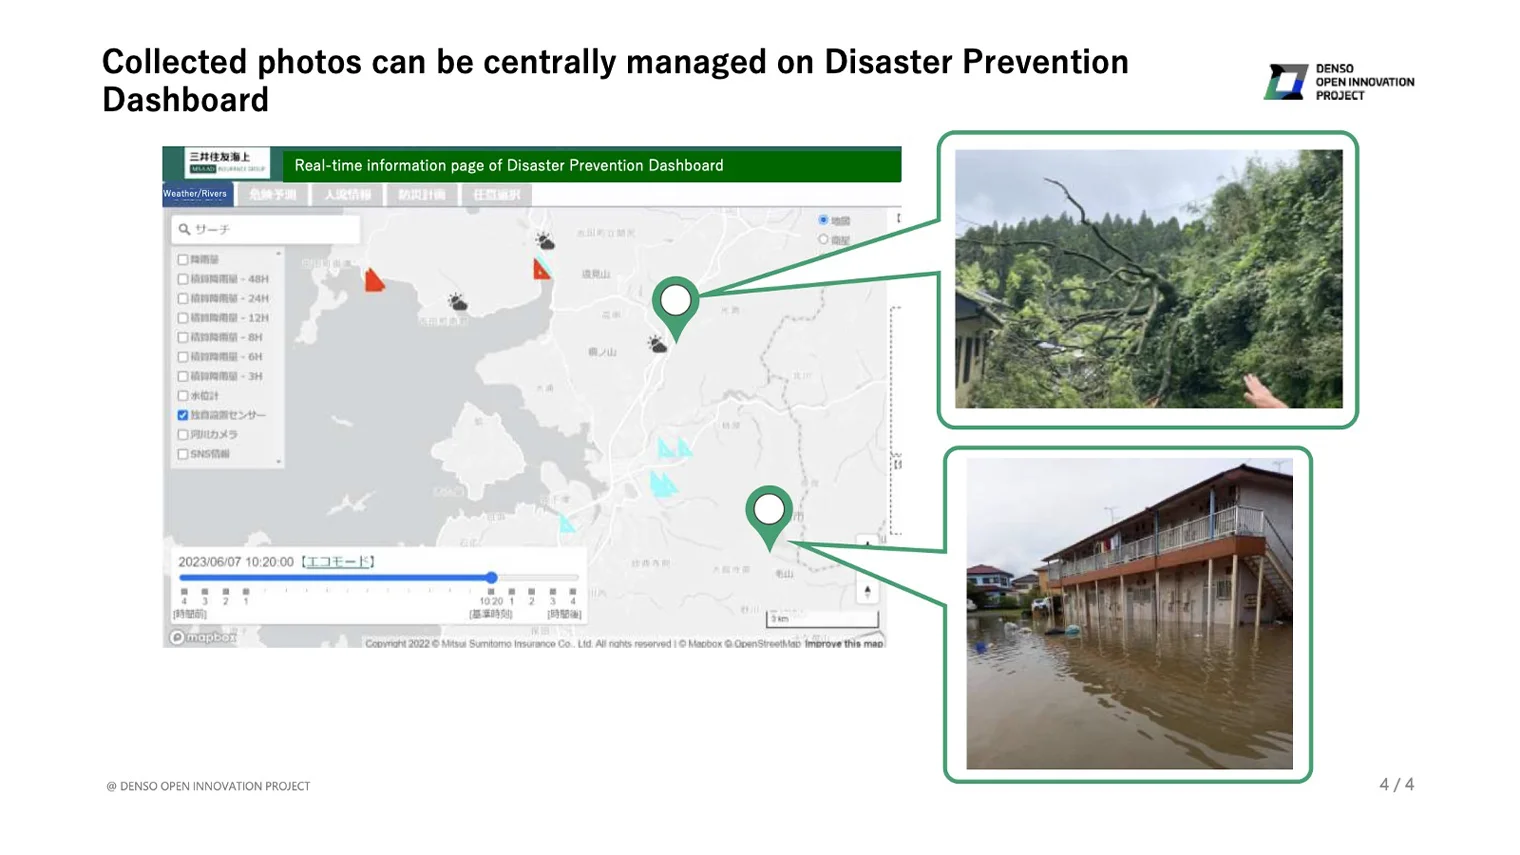 Collected photos can be centrally managed on Disaster Prevention Dashboard